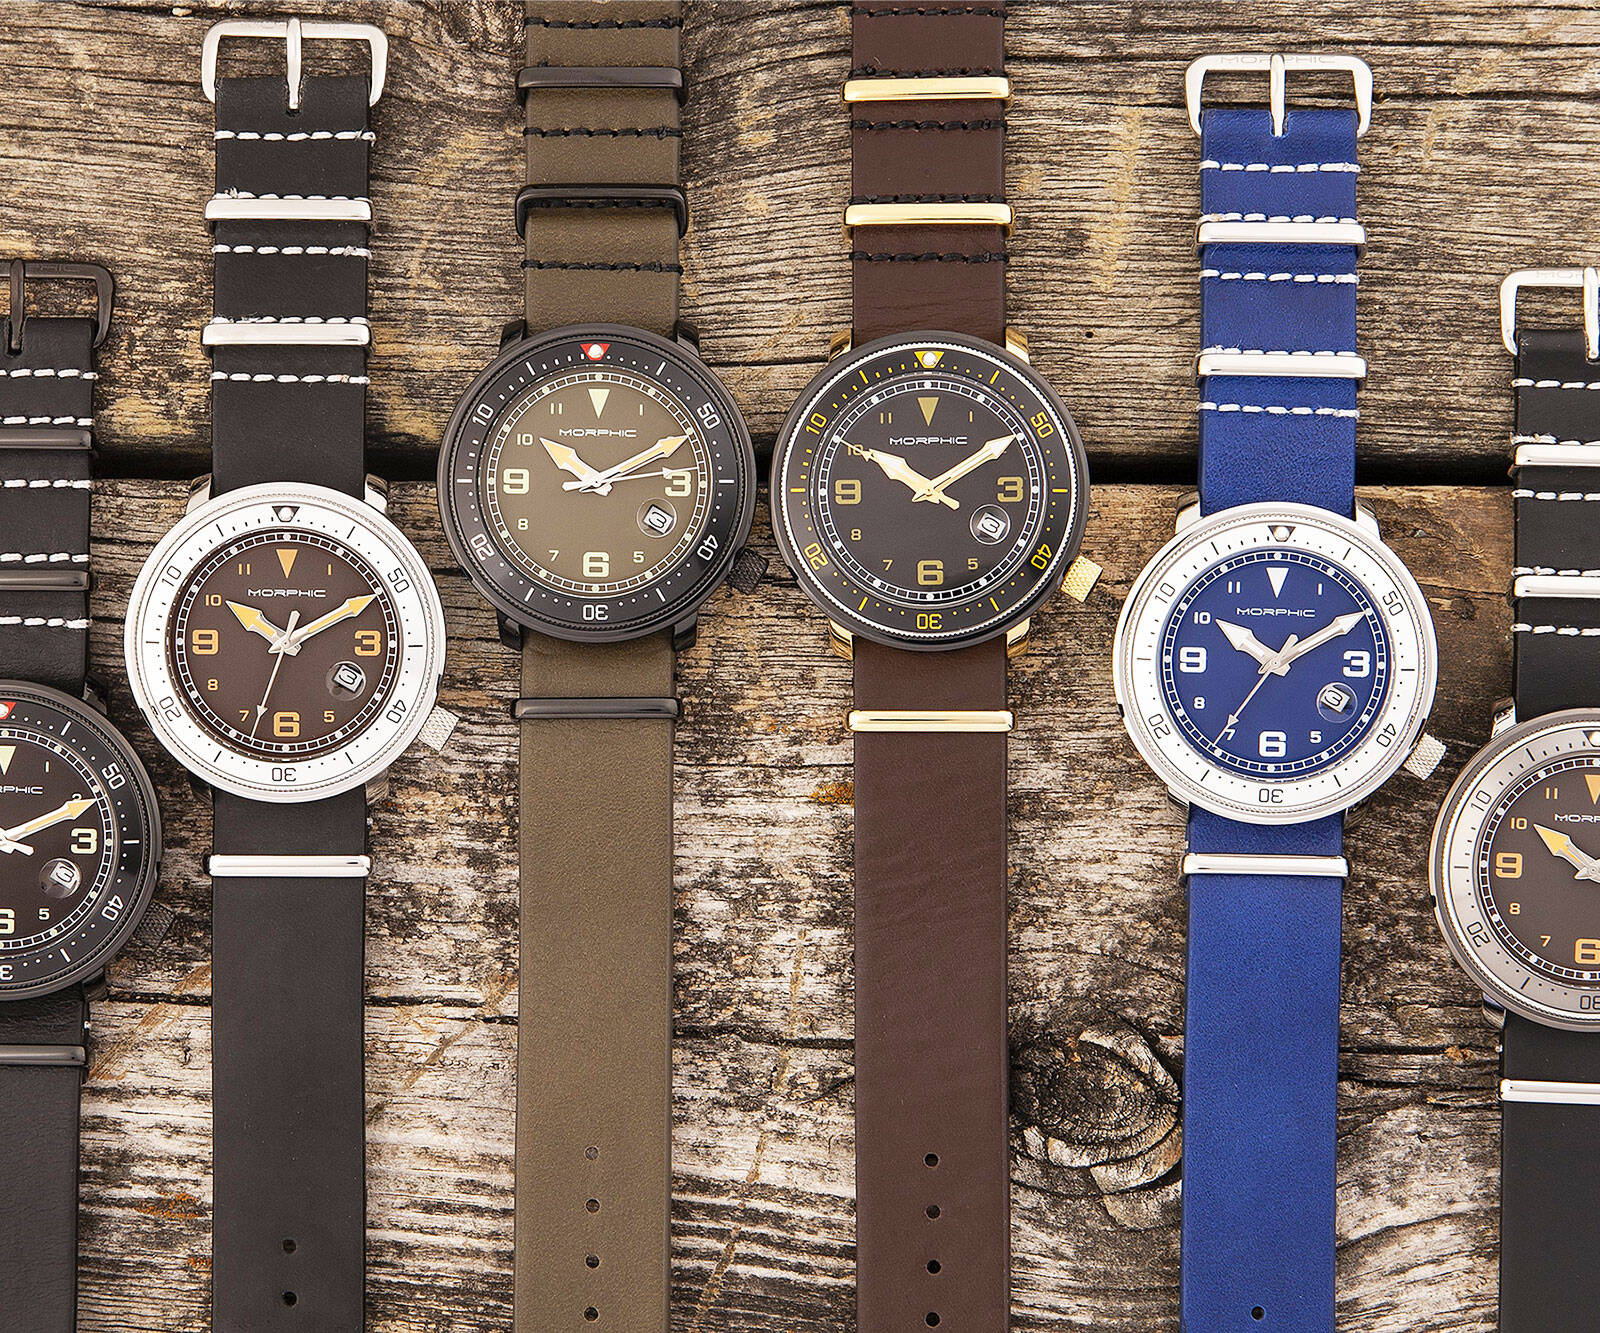 Morphic M58 Series Watches - //coolthings.us